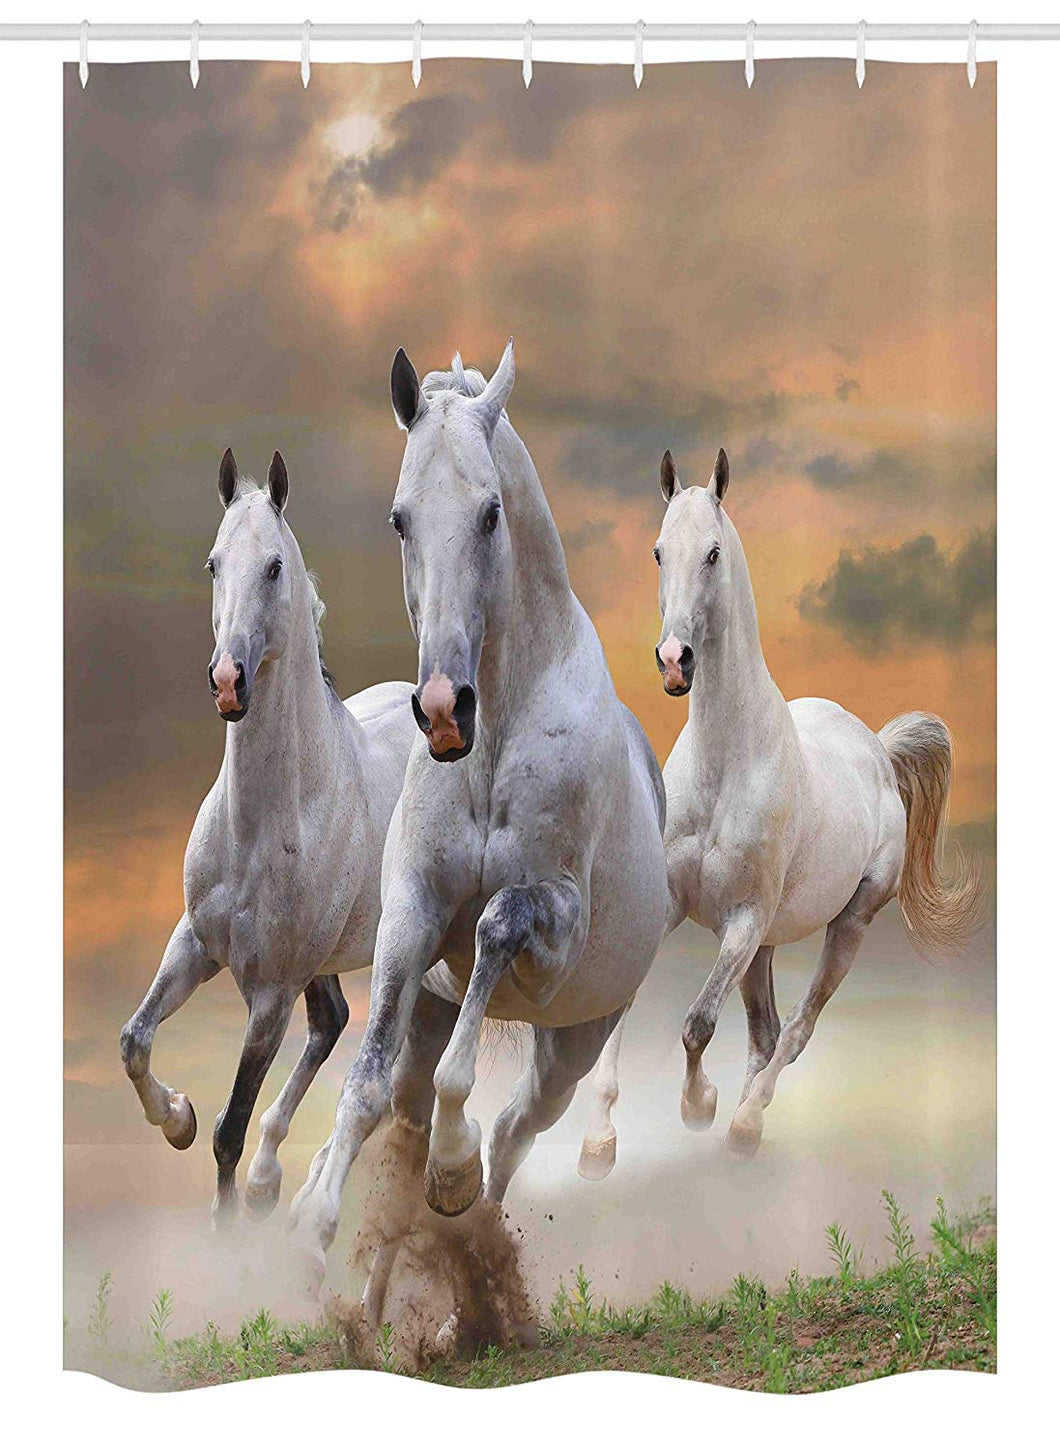 Ambesonne Horses Stall Shower Curtain, Stallion Horses Running on a Mystic Sky Background Equestrian Male Champions Print, Fabric Bathroom Decor Set with Hooks, 54 W x 78 L Inches, White Orange